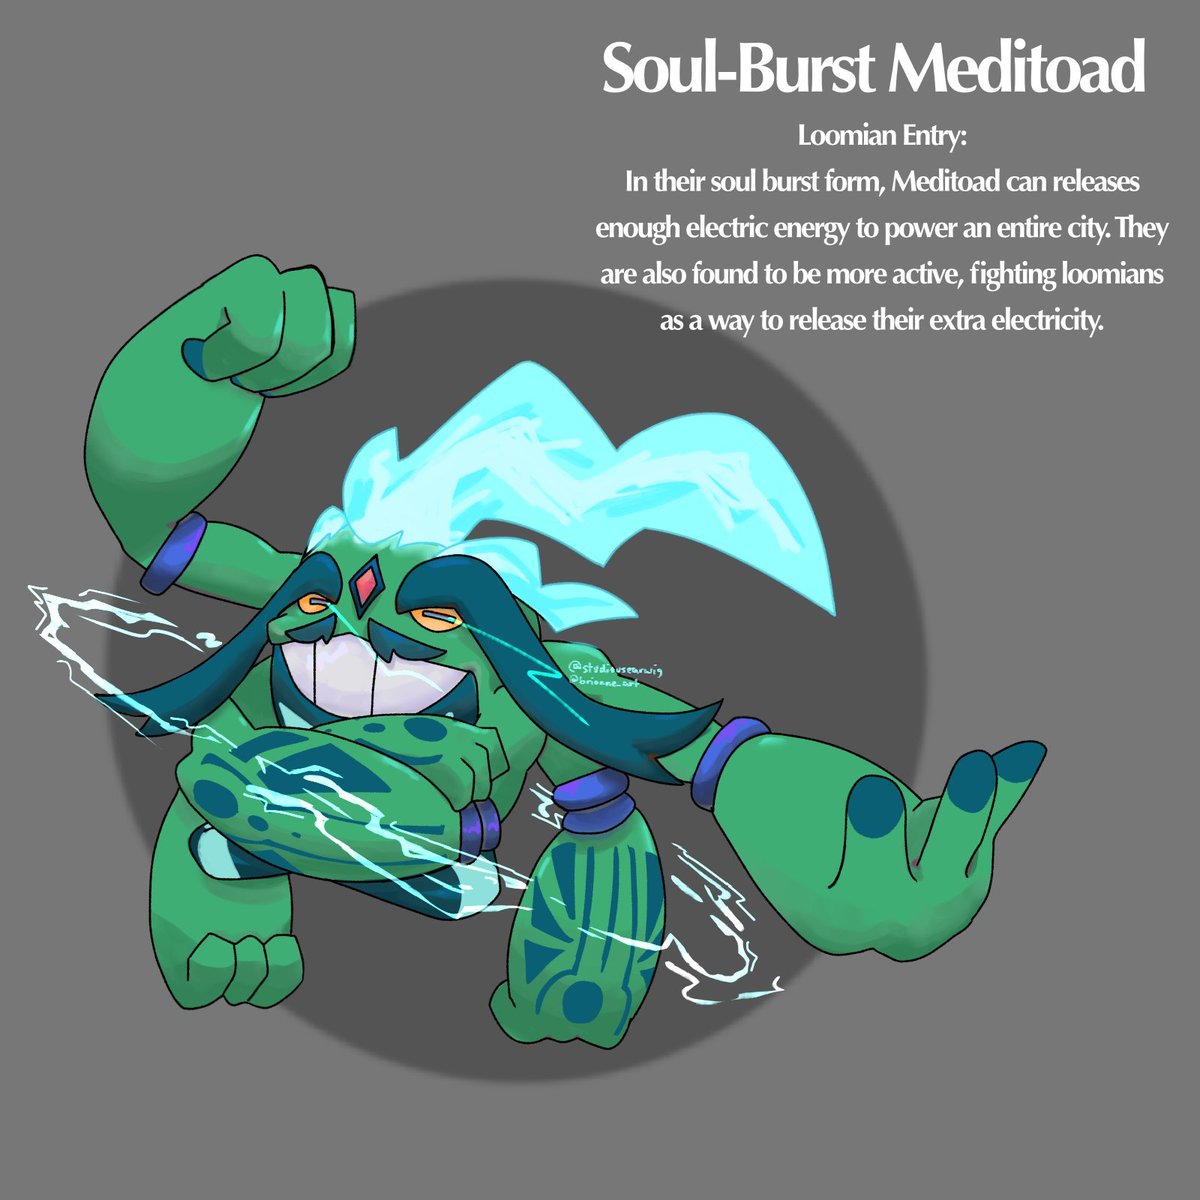 Day 3 of making soul burst loomians until loomian legacy accepts one of  these designs, thoughts? : r/LoomianLegacy